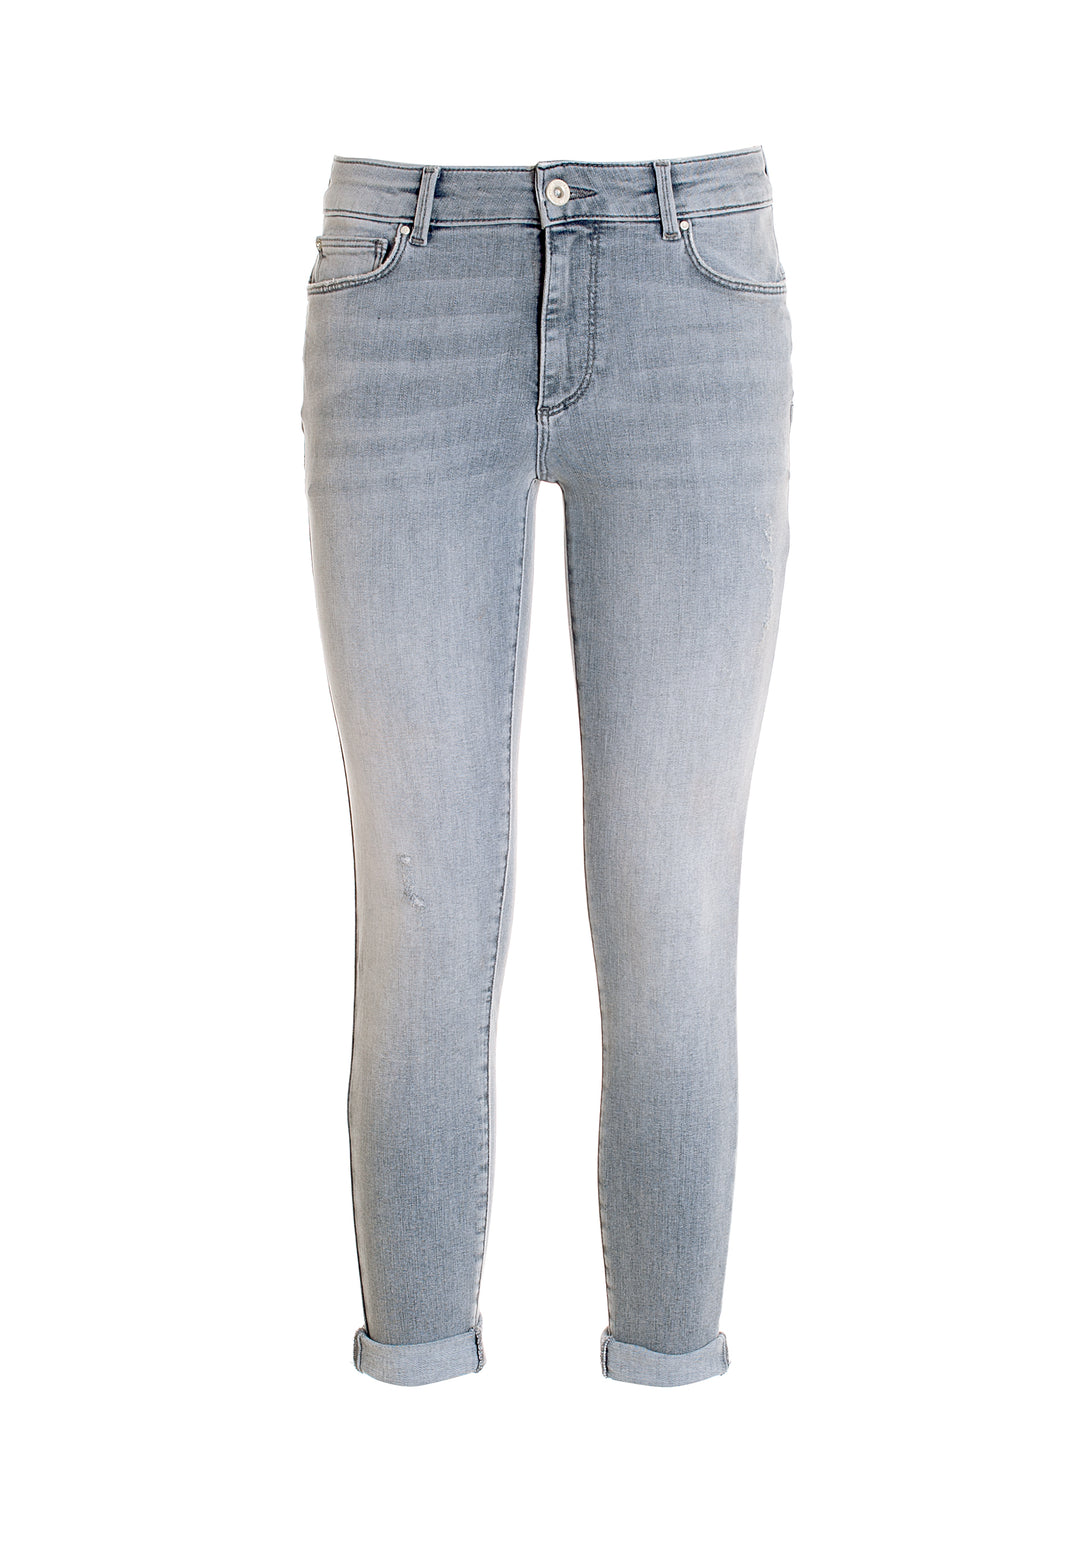 Jeans slim fit with push-up effect made in grey denim